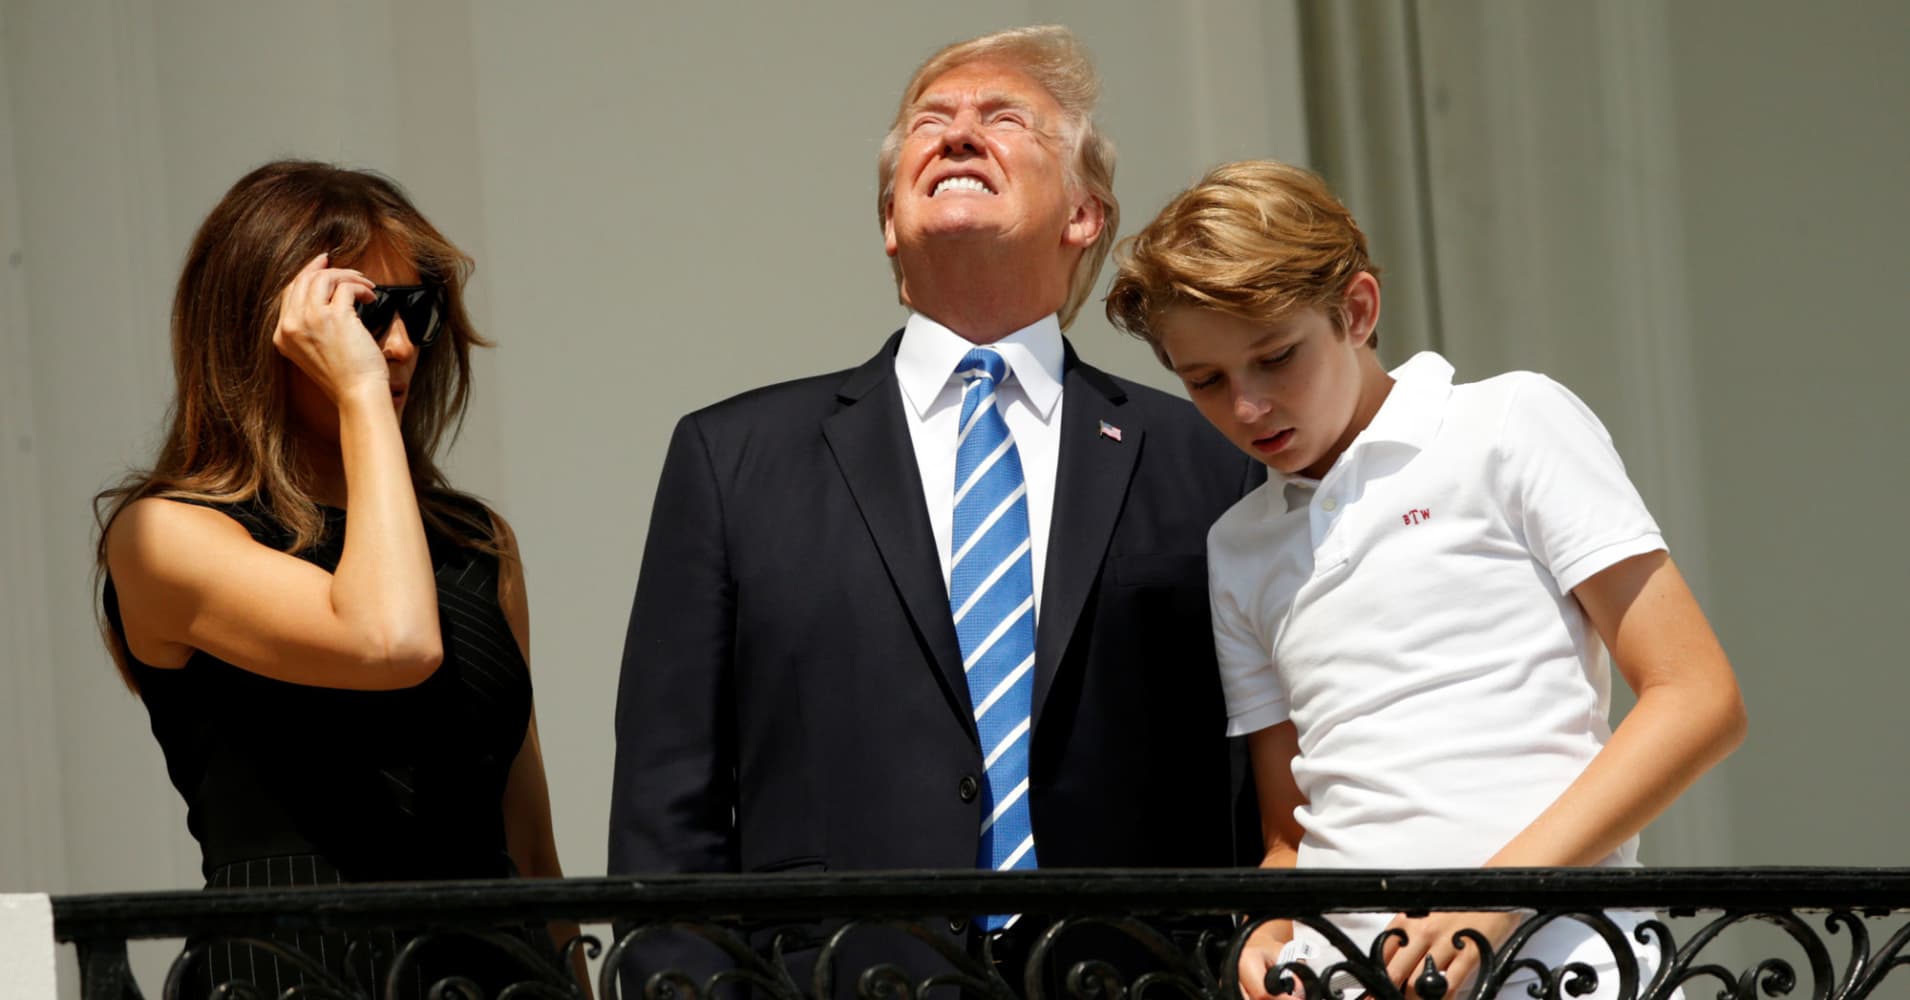 Trump watched the eclipse without viewing glasses